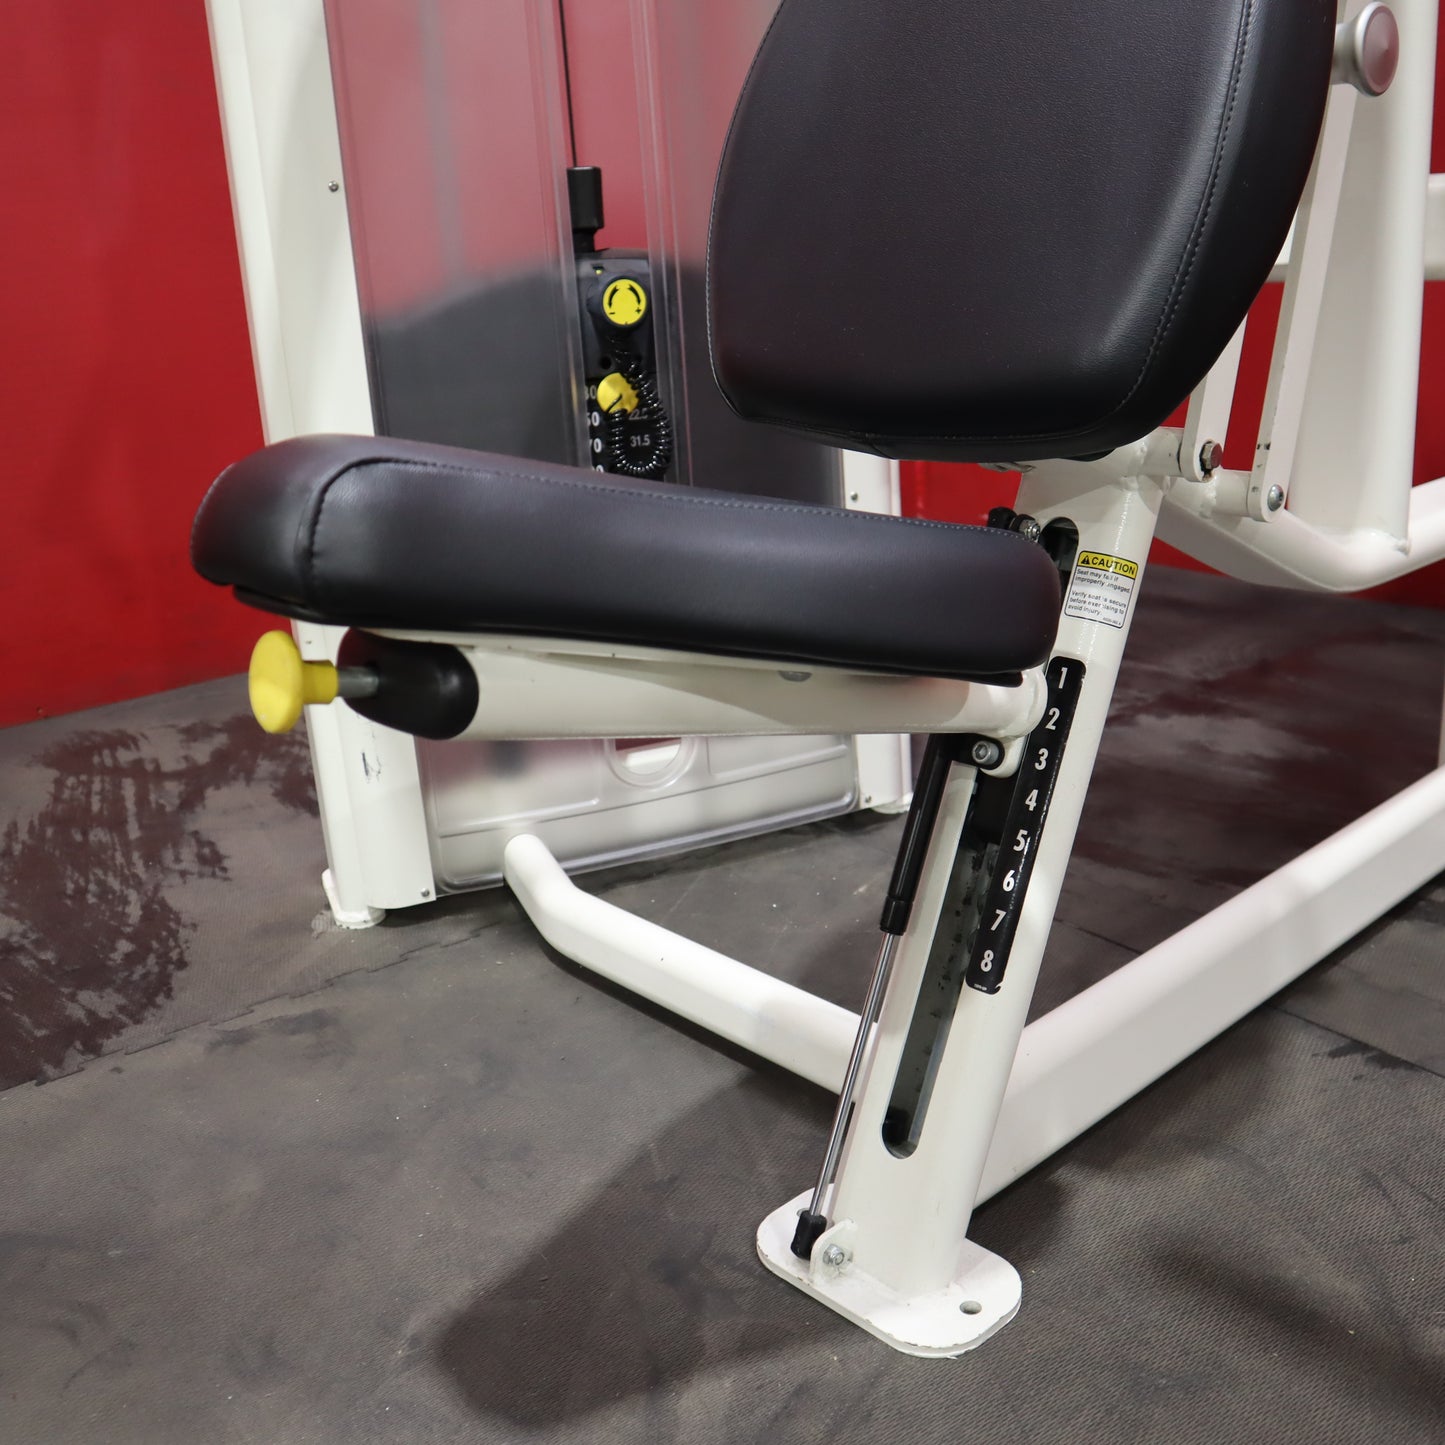 Cybex VR3 Selectorized Chest Press (Refurbished)